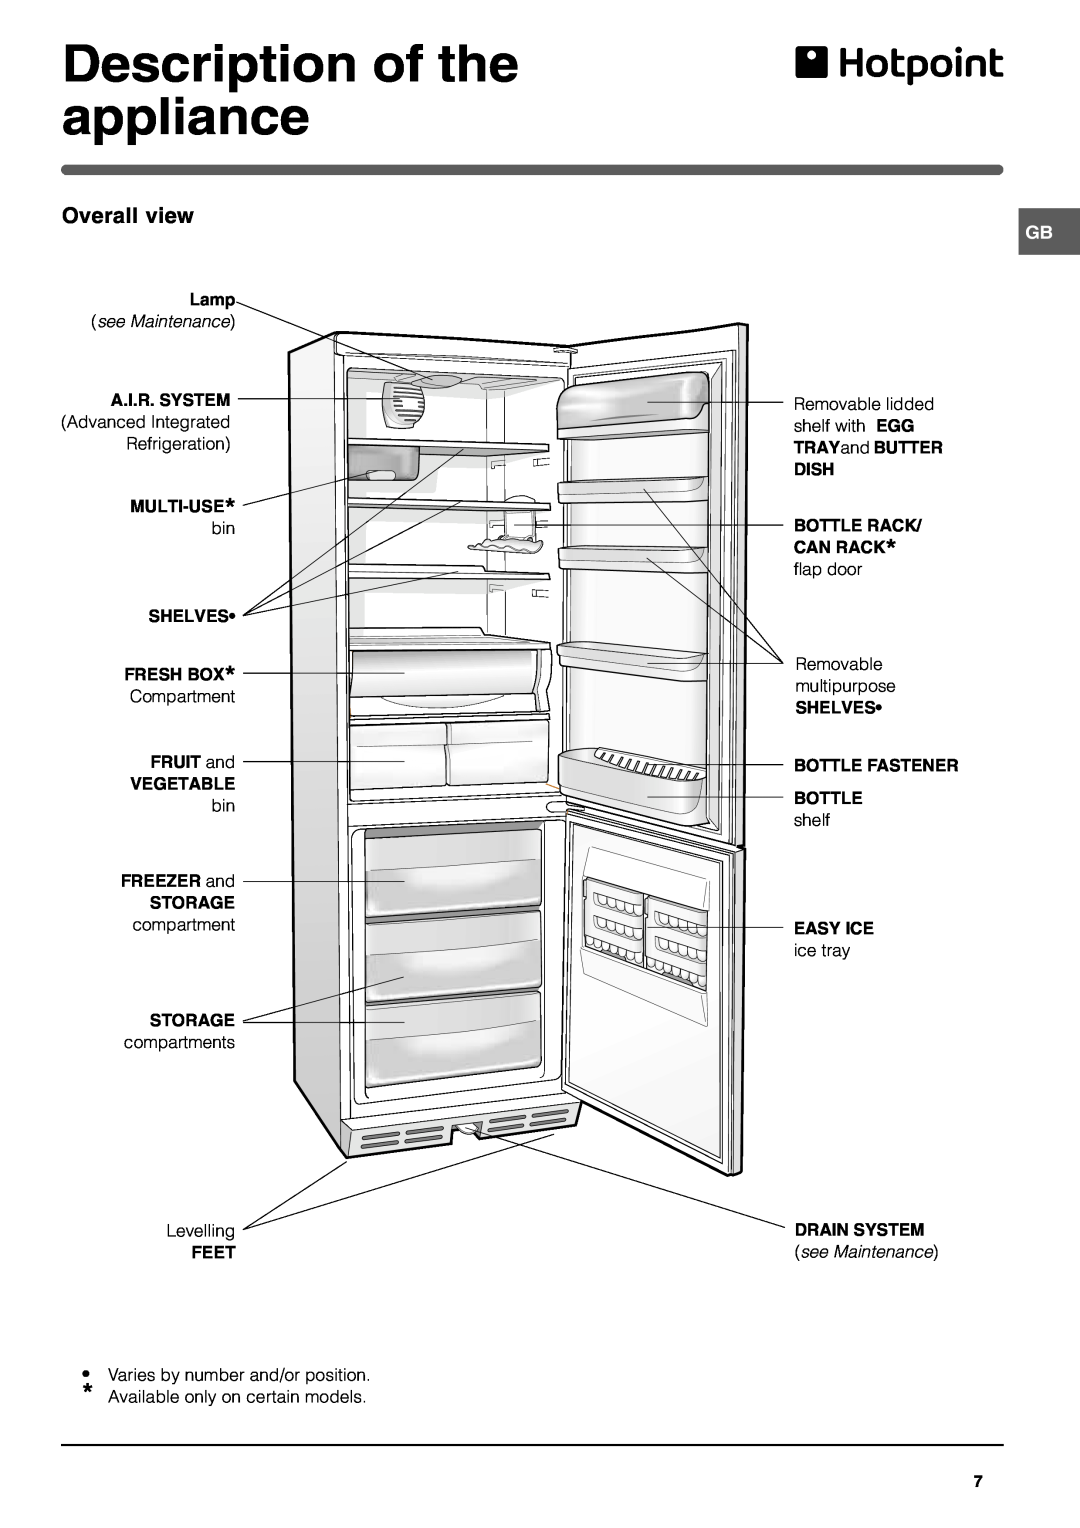 Hotpoint HME40N Overall view, Description of the appliance, Lamp, see Maintenance, A.I.R. System, Multi-Use, Storage, Feet 